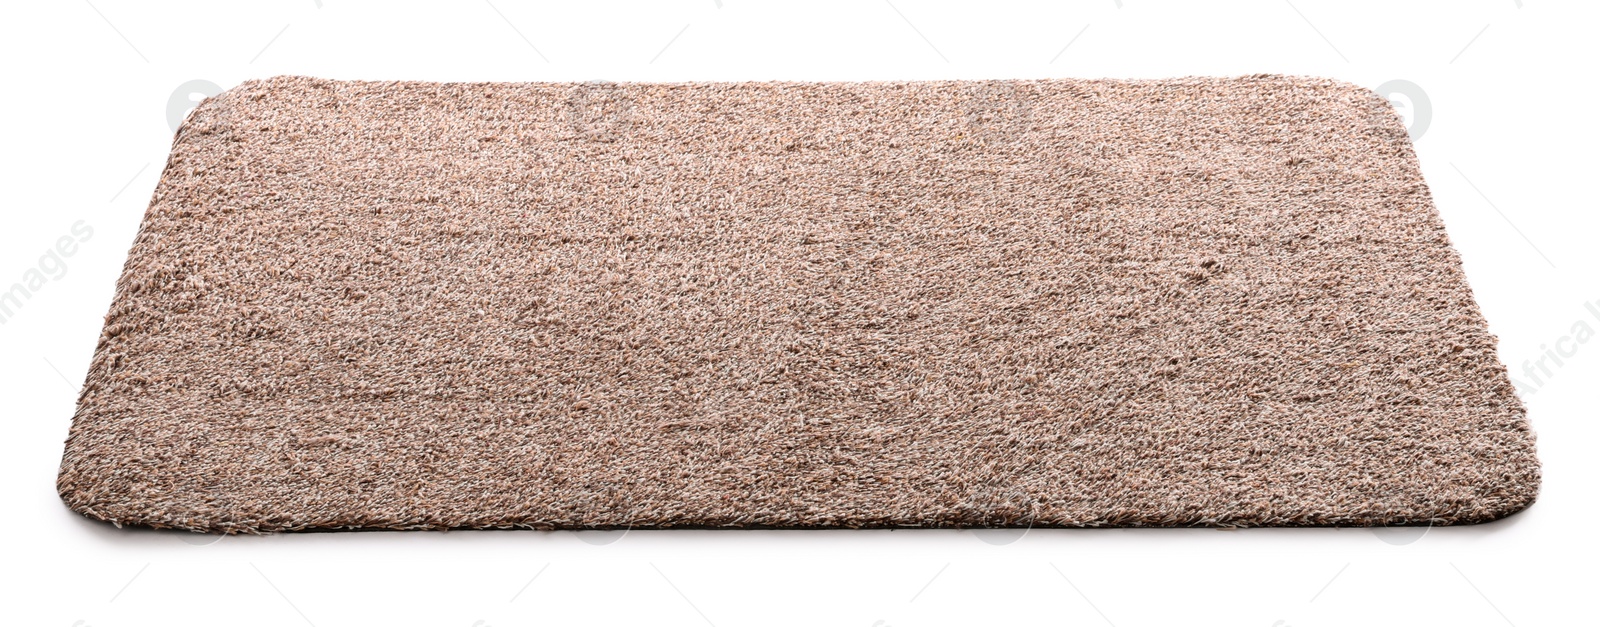 Photo of New clean door mat on white background